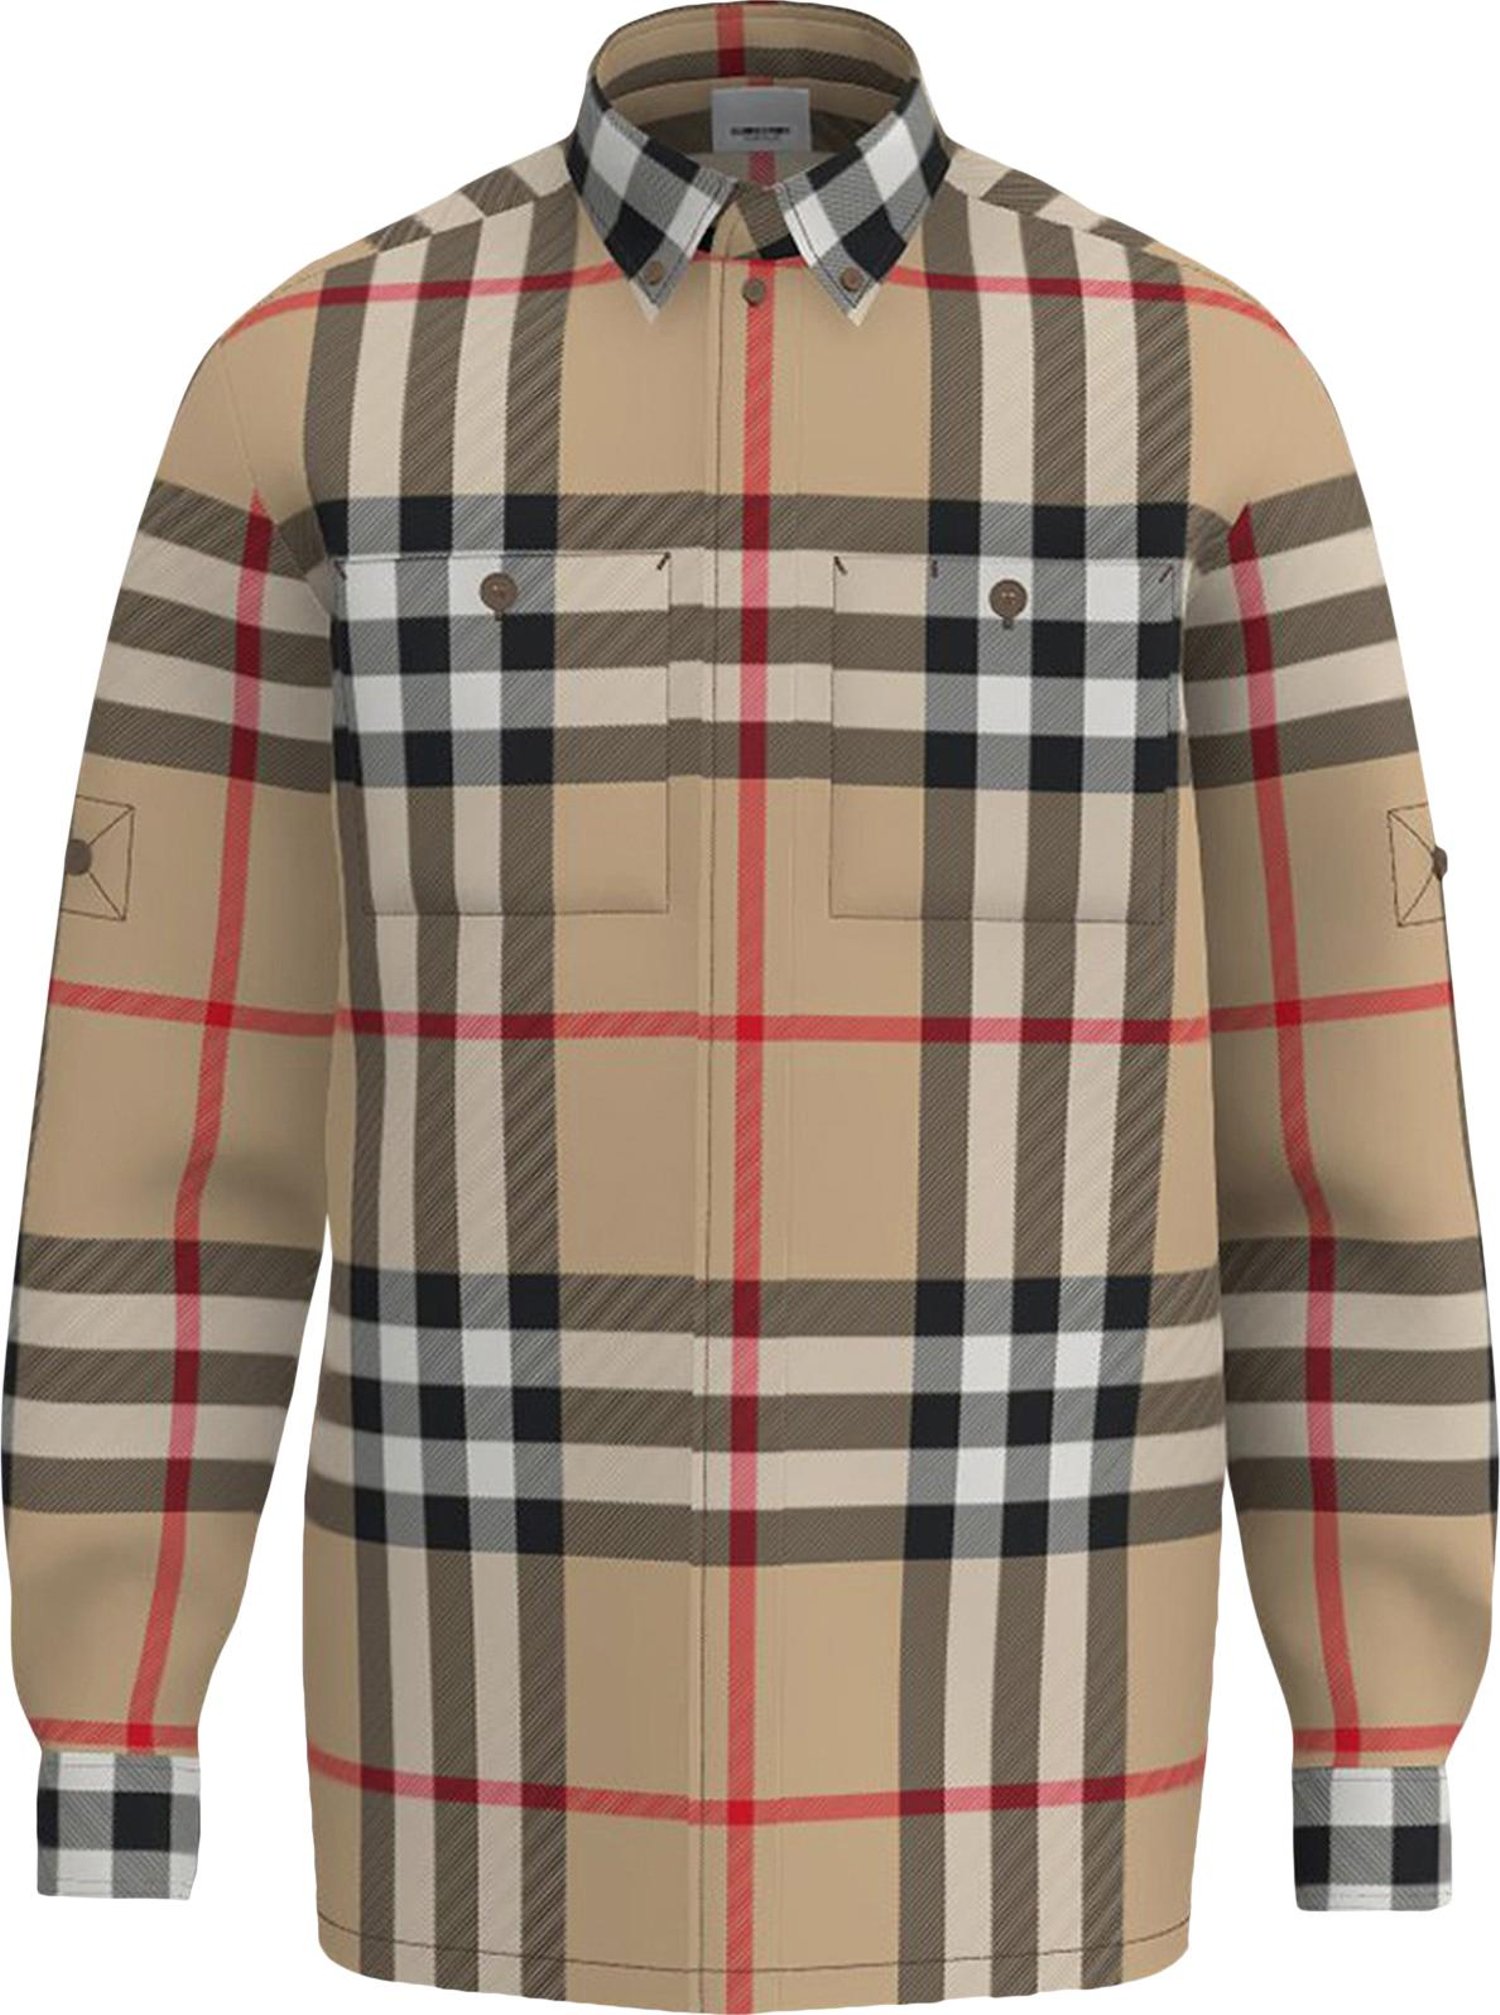 Buy Burberry House Check Shirt 'Archive Beige' - 8058584 | GOAT